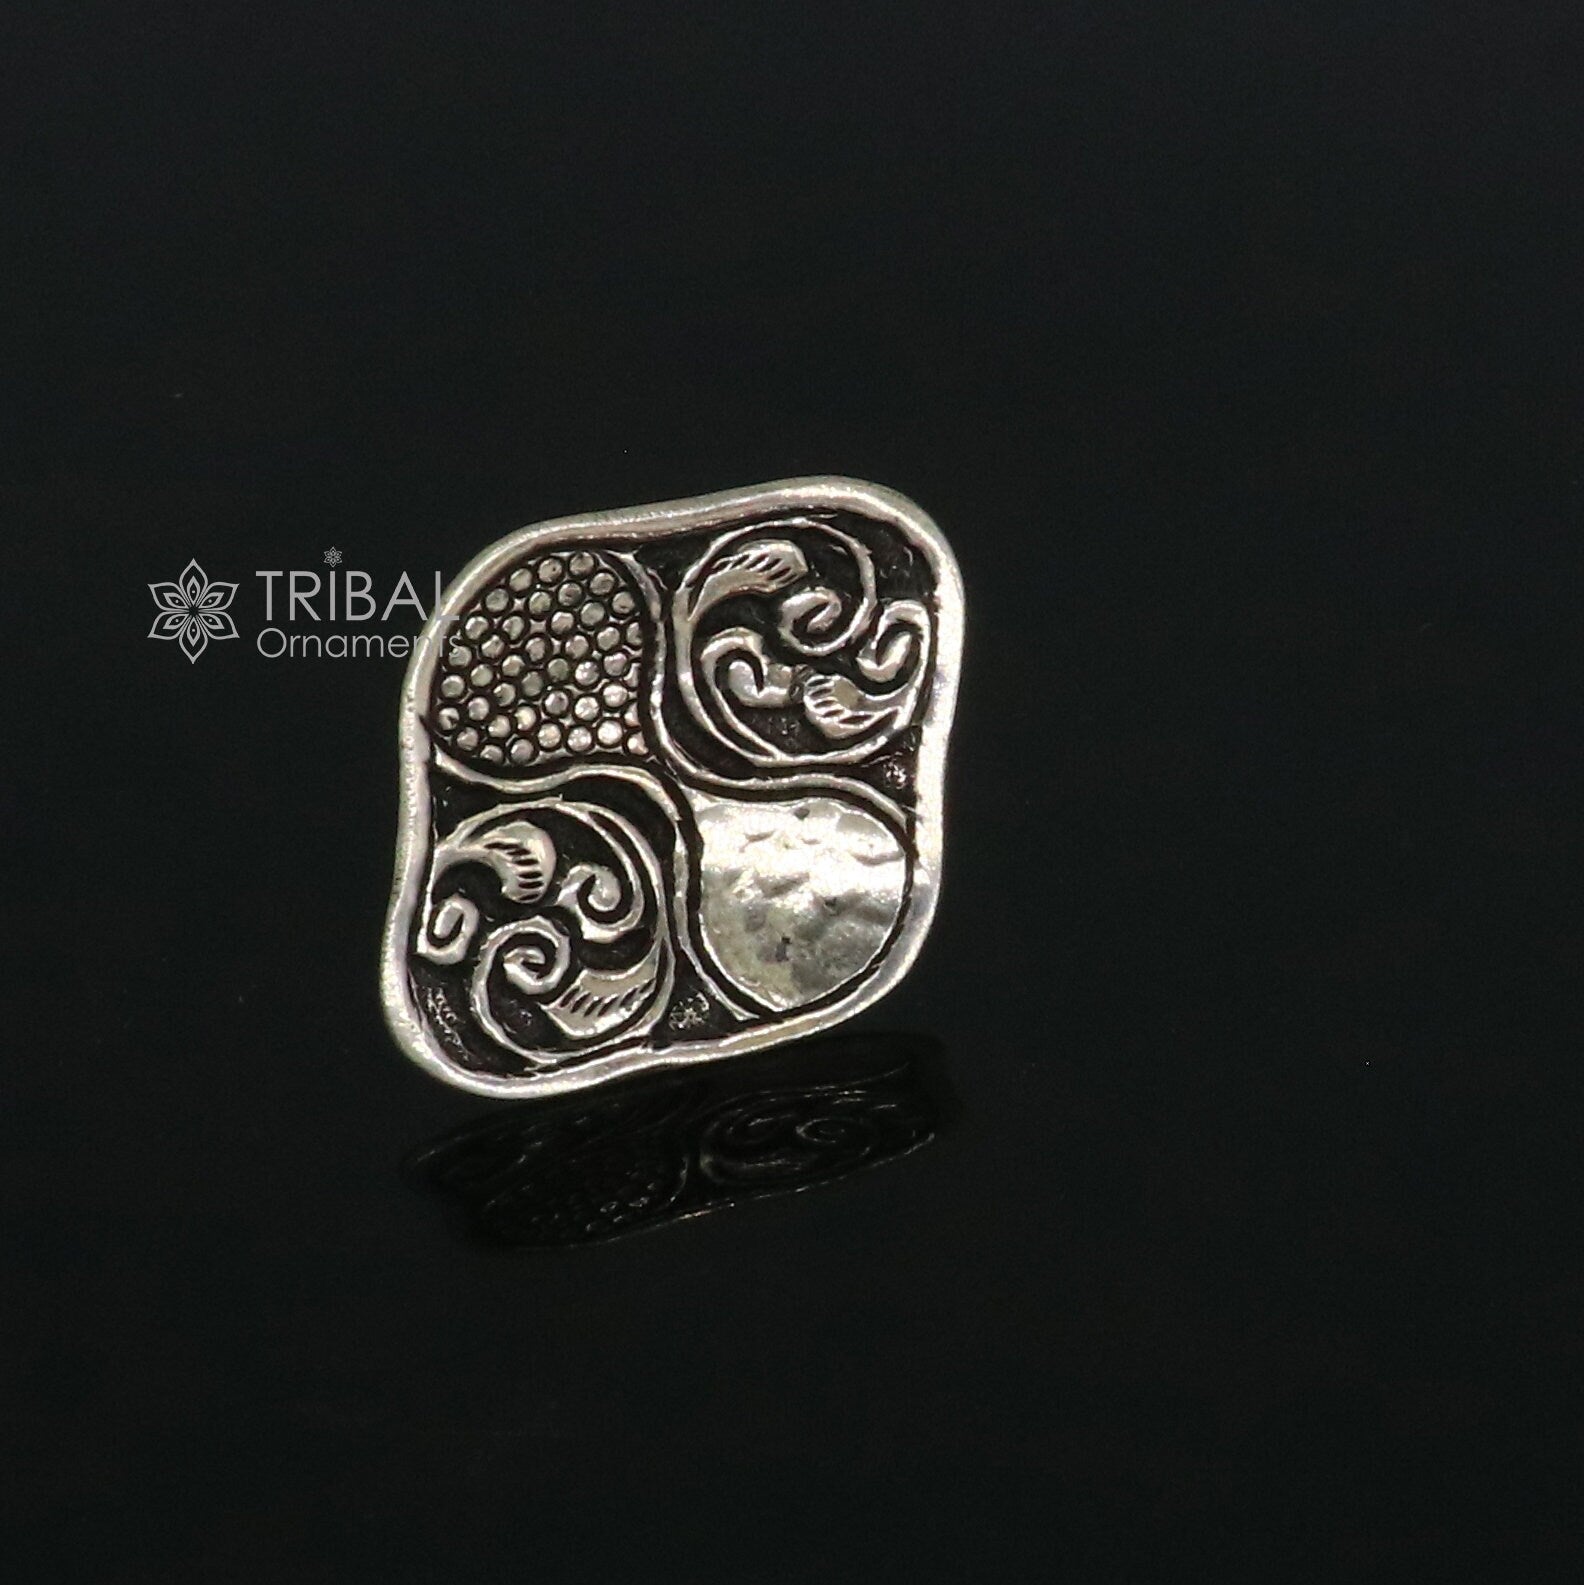 Indian Classical cultural flower design 925 sterling silver adjustable ring, best tribal ethnic jewelry Navratri jewelry sr390 - TRIBAL ORNAMENTS